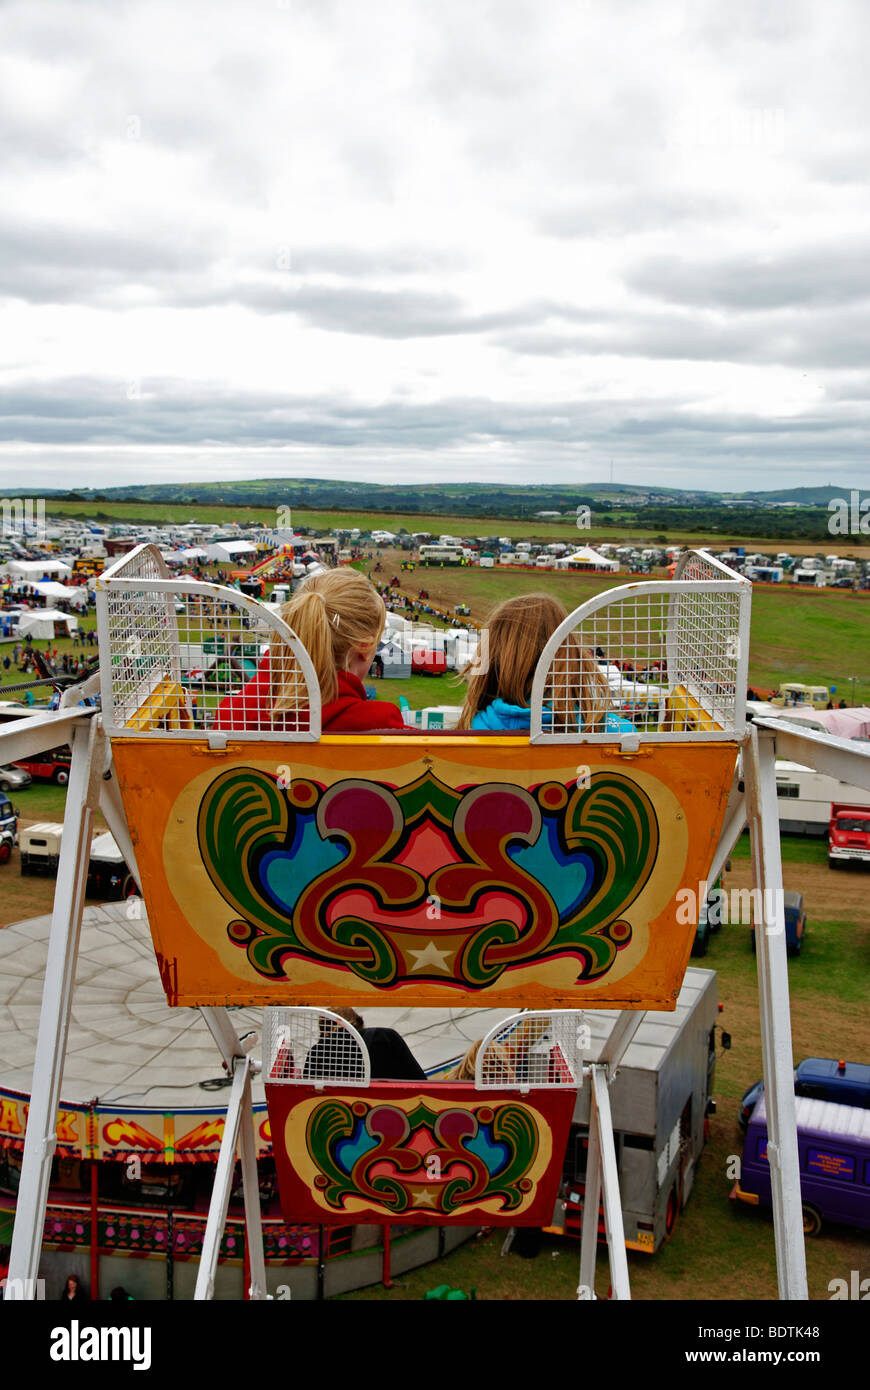 a view from the top of a ferris wheel at the fairground, uk Stock Photo